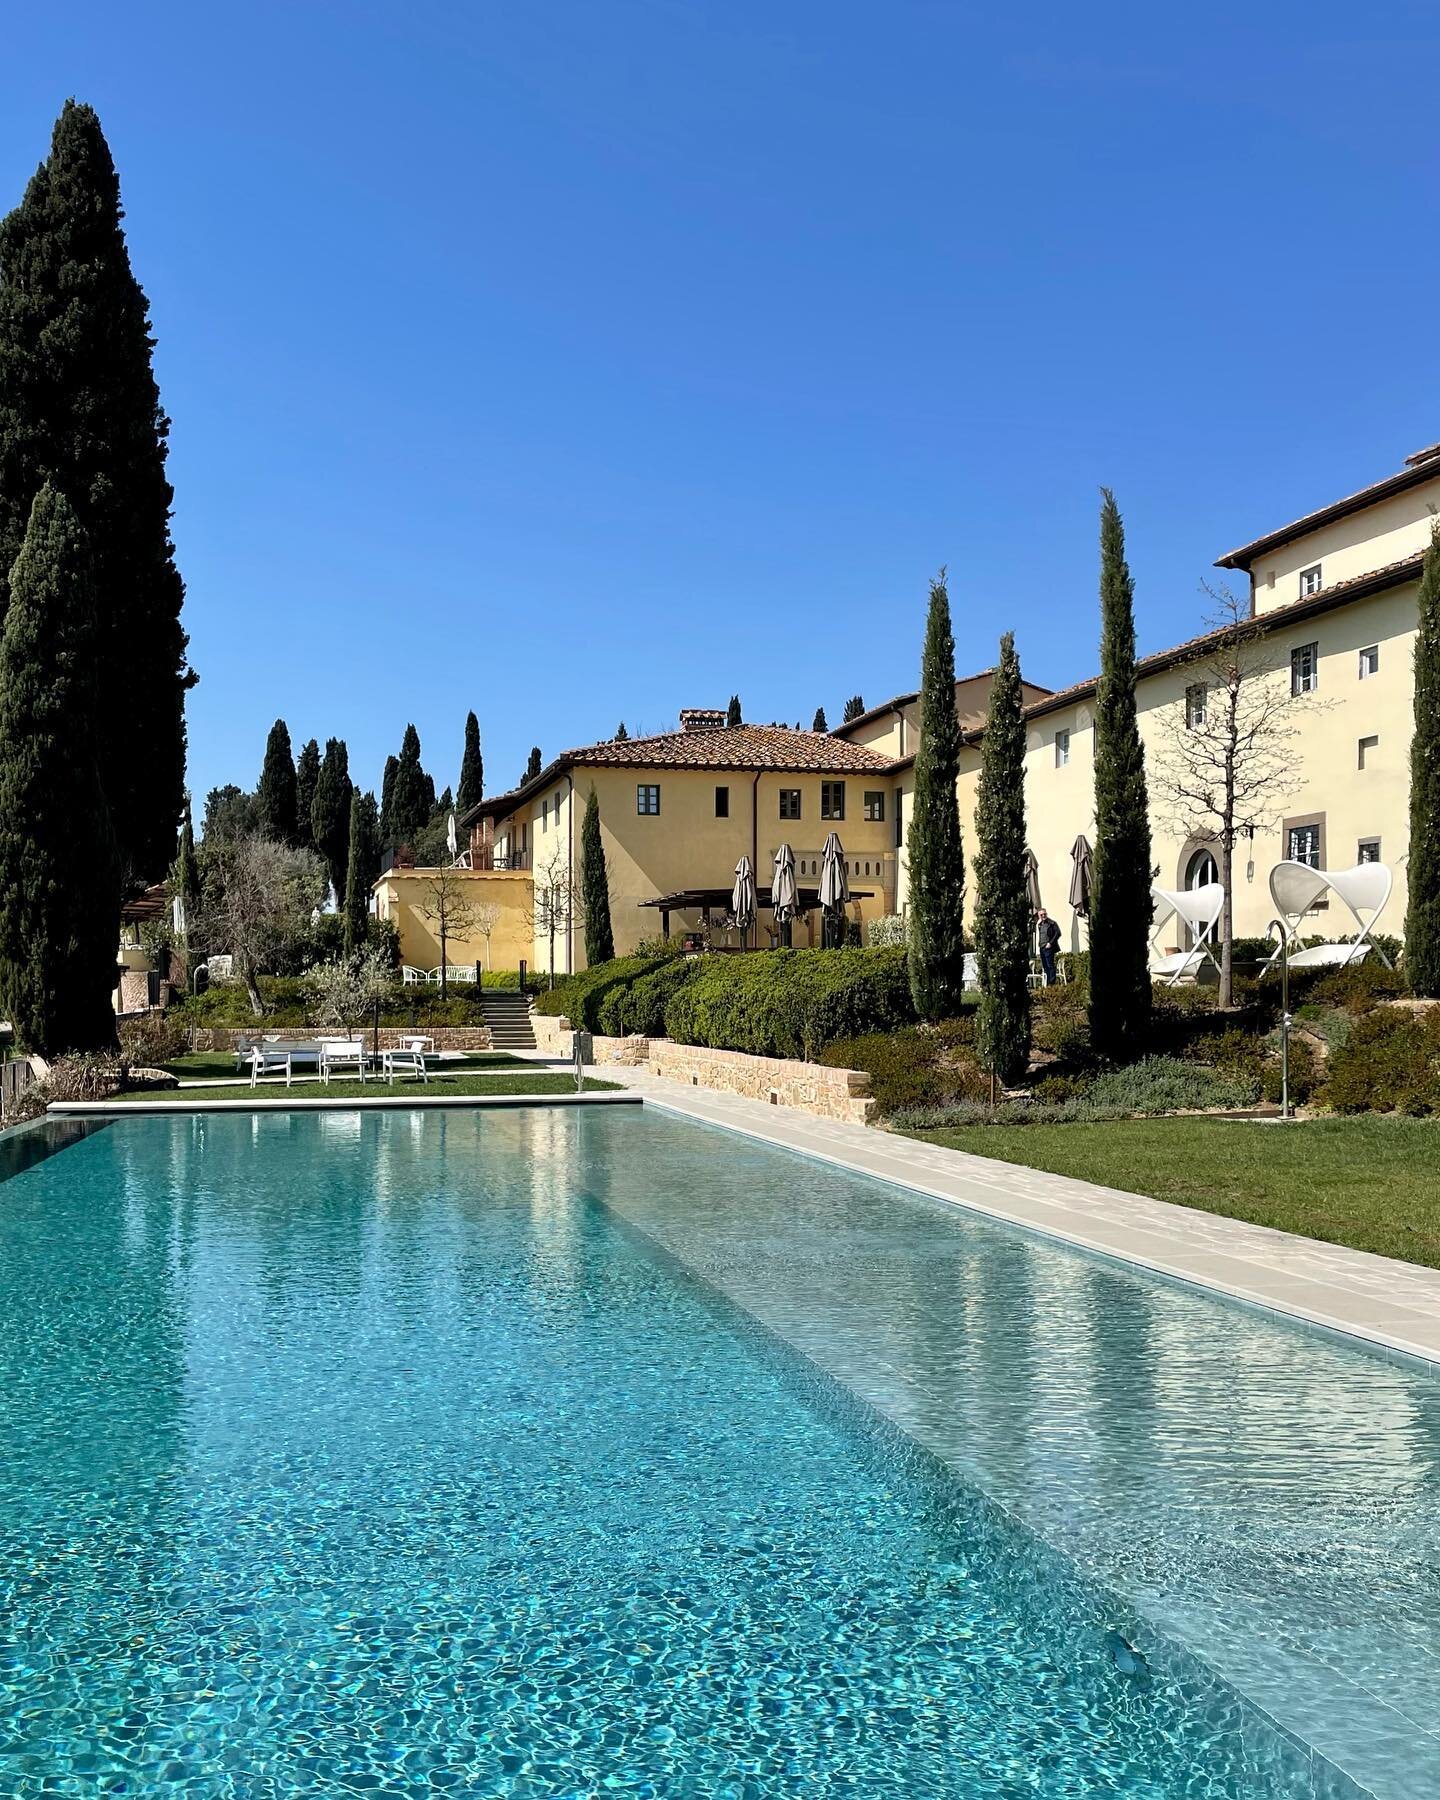 Our time at Villa Petriolo - a true Tuscan dream. ☀️This lovingly restored villa  is &ldquo;transformed into an agricultural estate,
where centuries of history are reflected. The
stimulation of the senses by nature, the
possibility of accommodation t